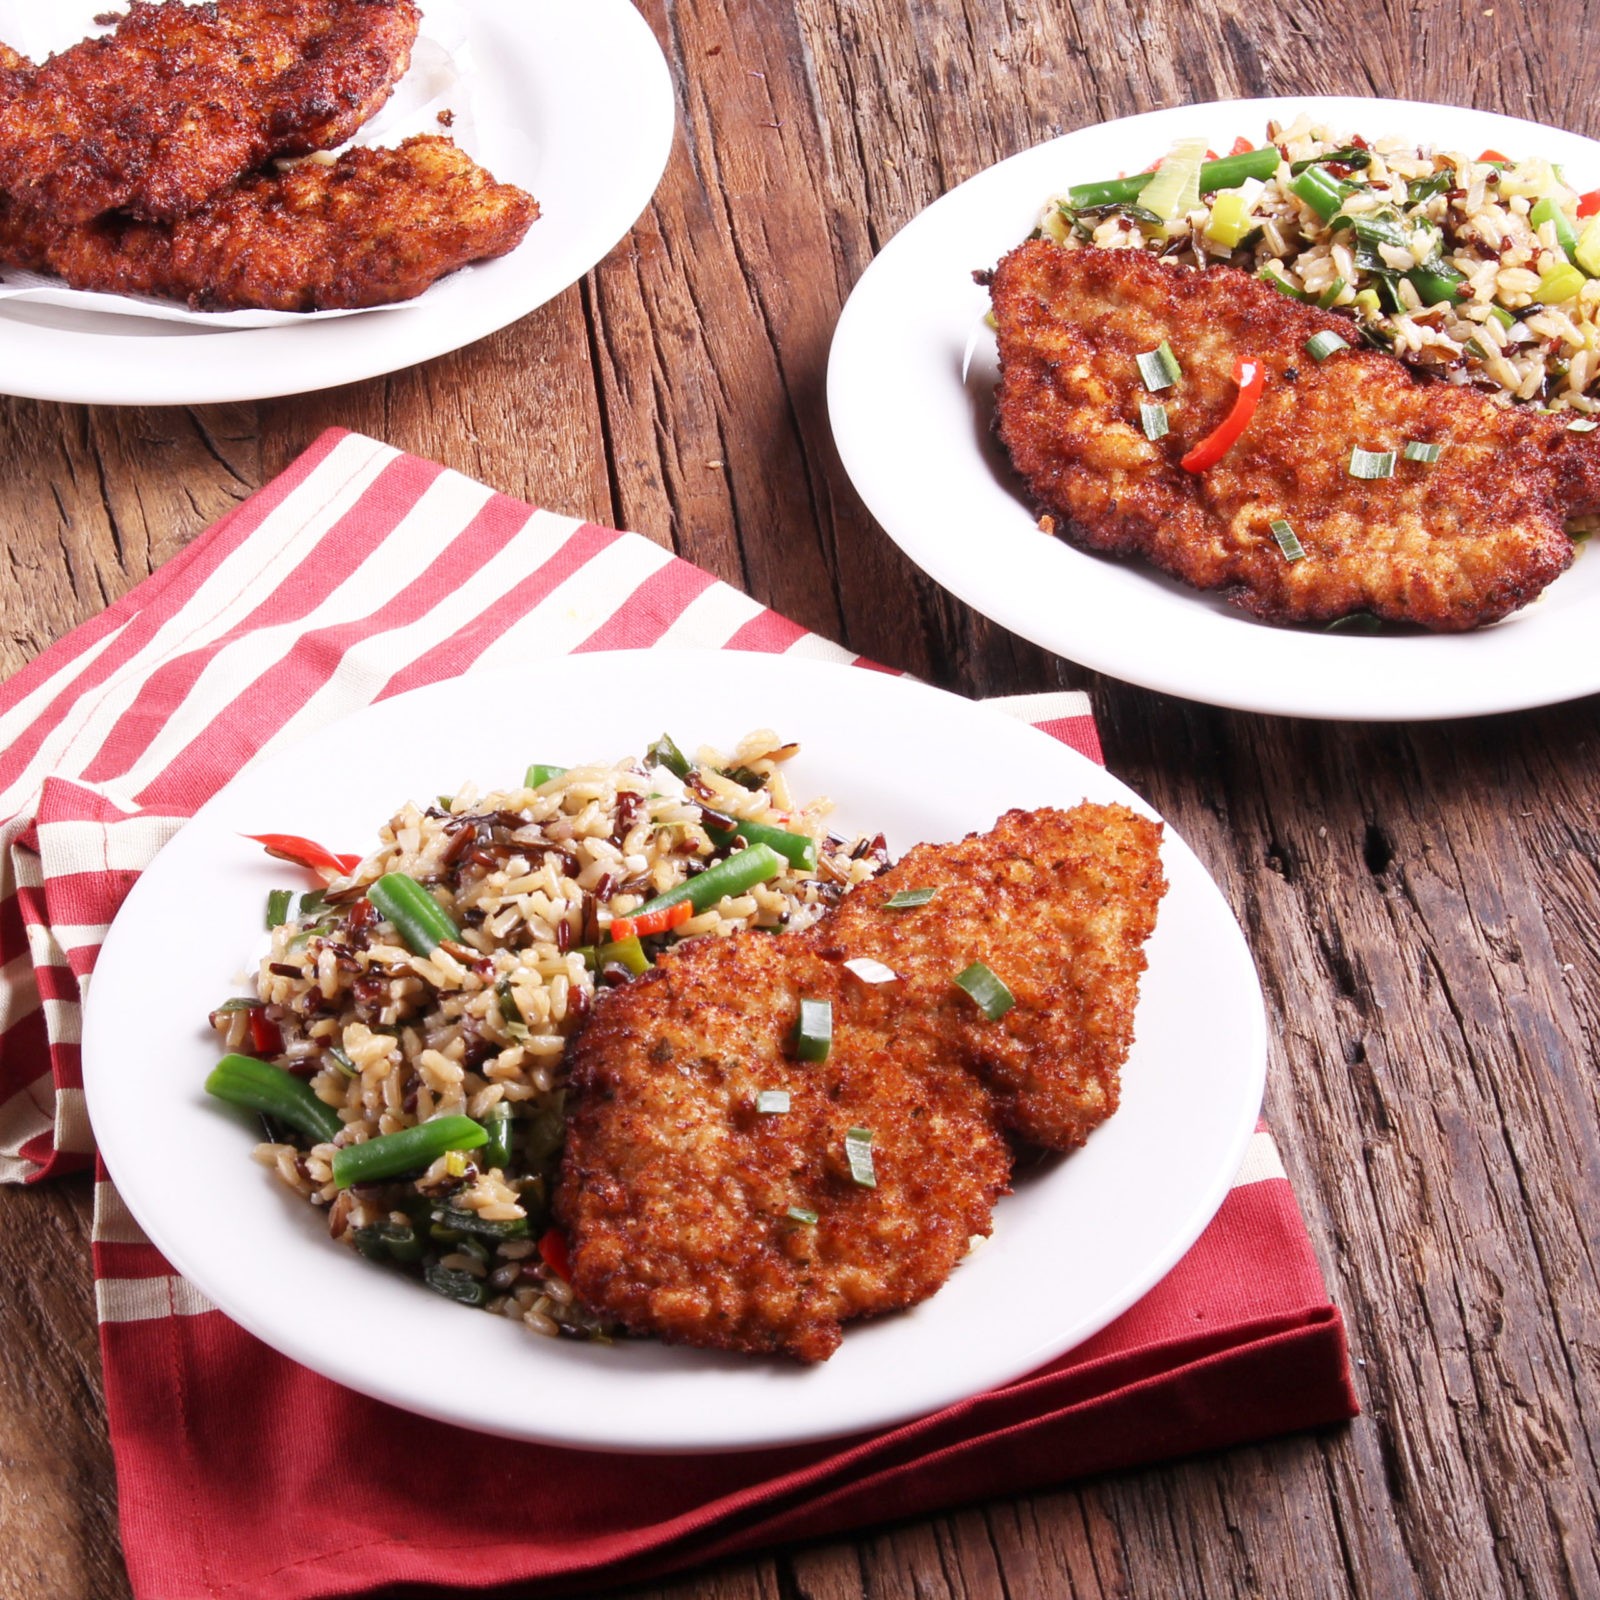 Schnitzel With Buttered Wild Rice And Green Beans - Three Aussie Farmers Lightly Seasoned Pork Schnitzel